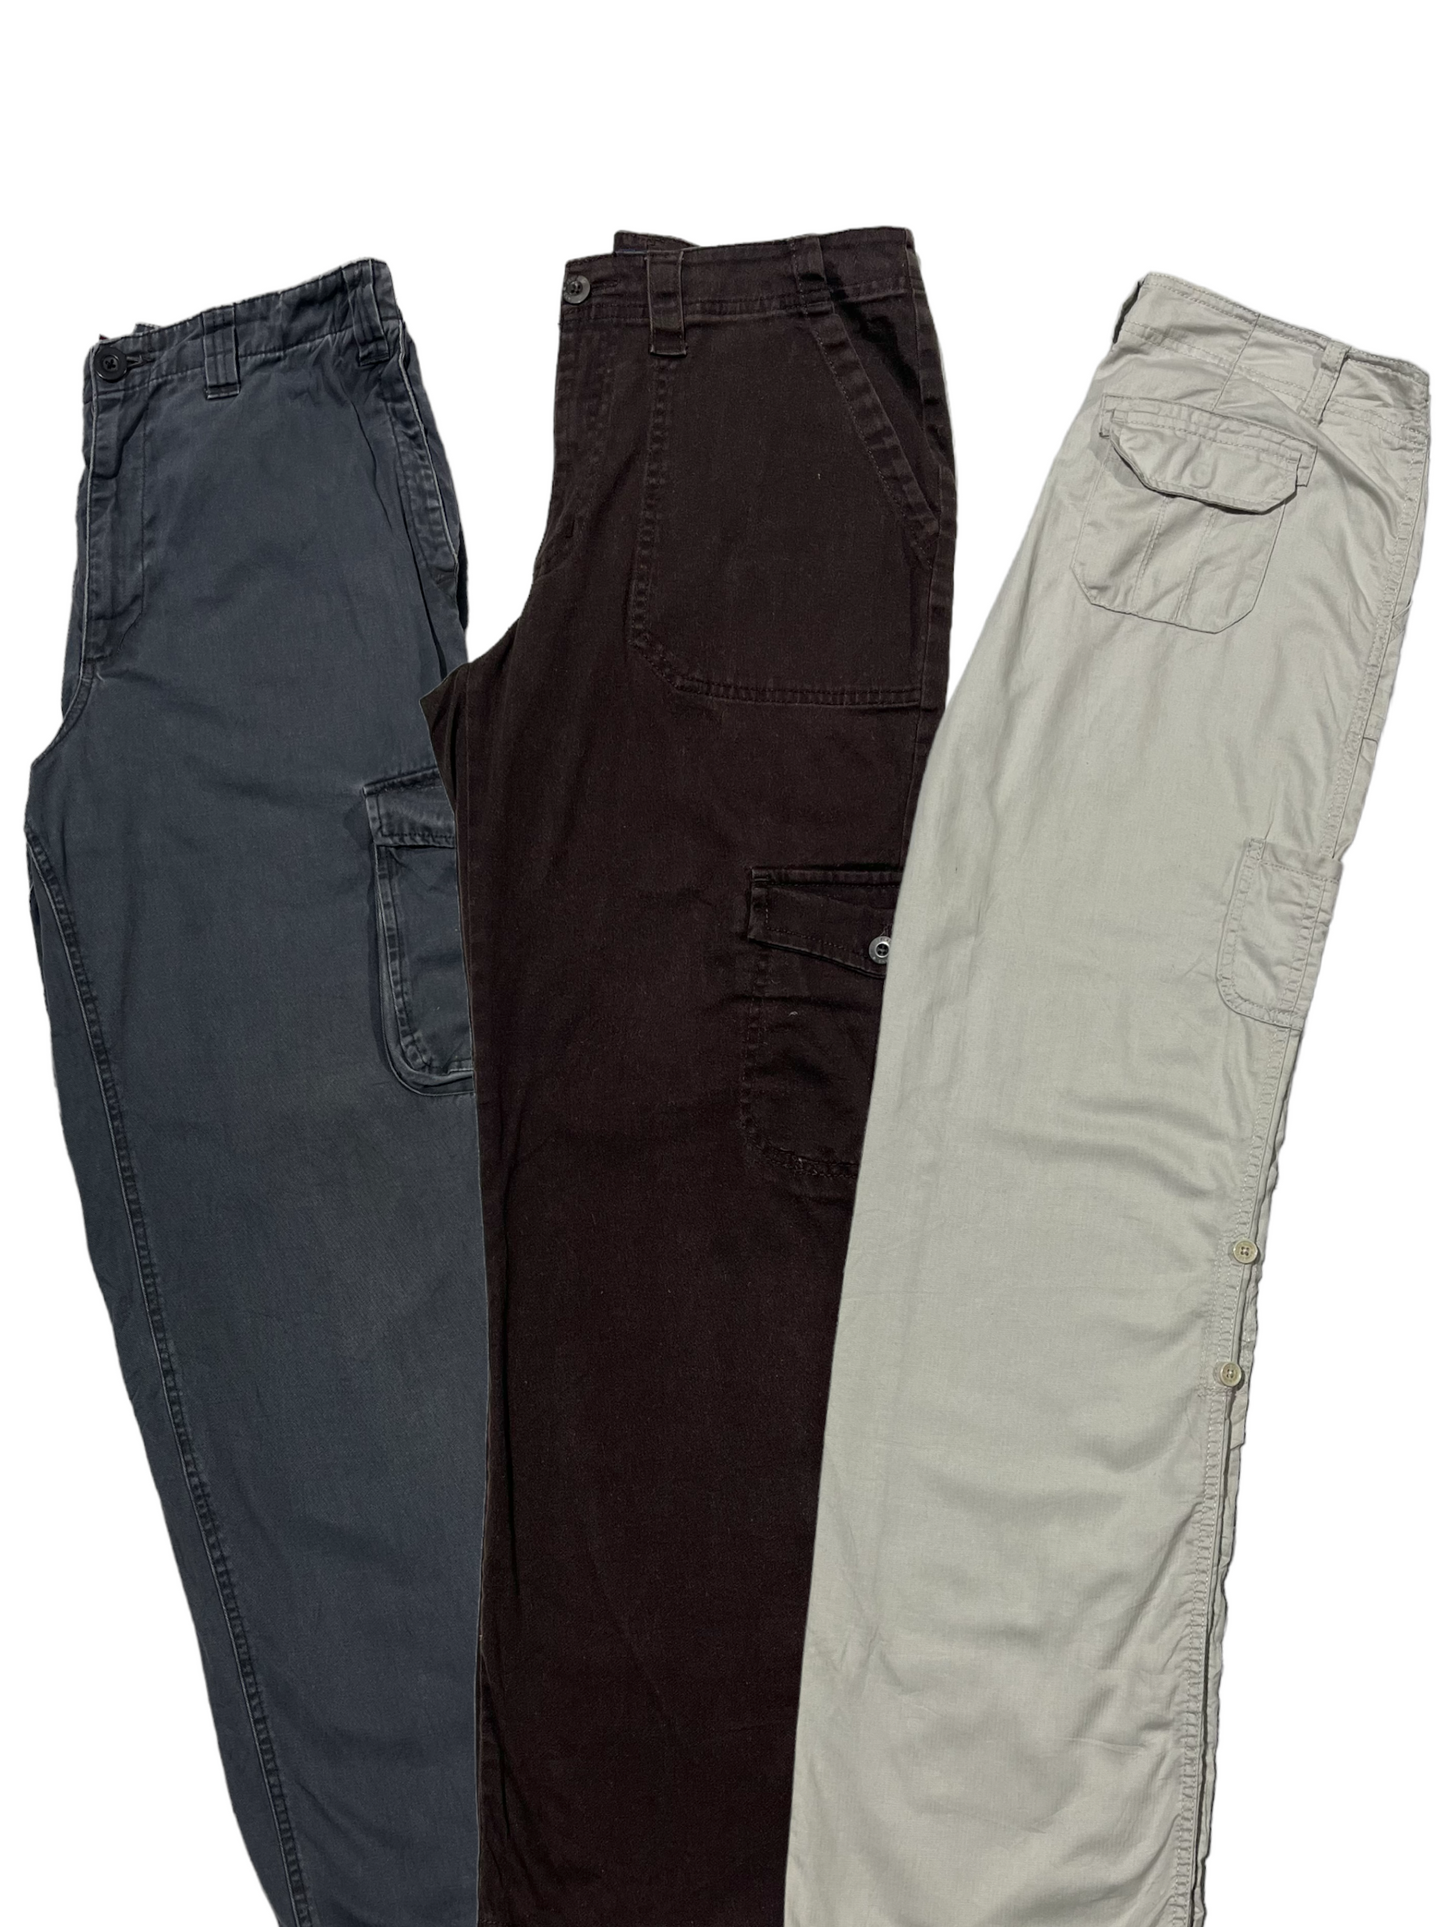 UNBRANDED CARGO TROUSER - 50 PIECES - BALE